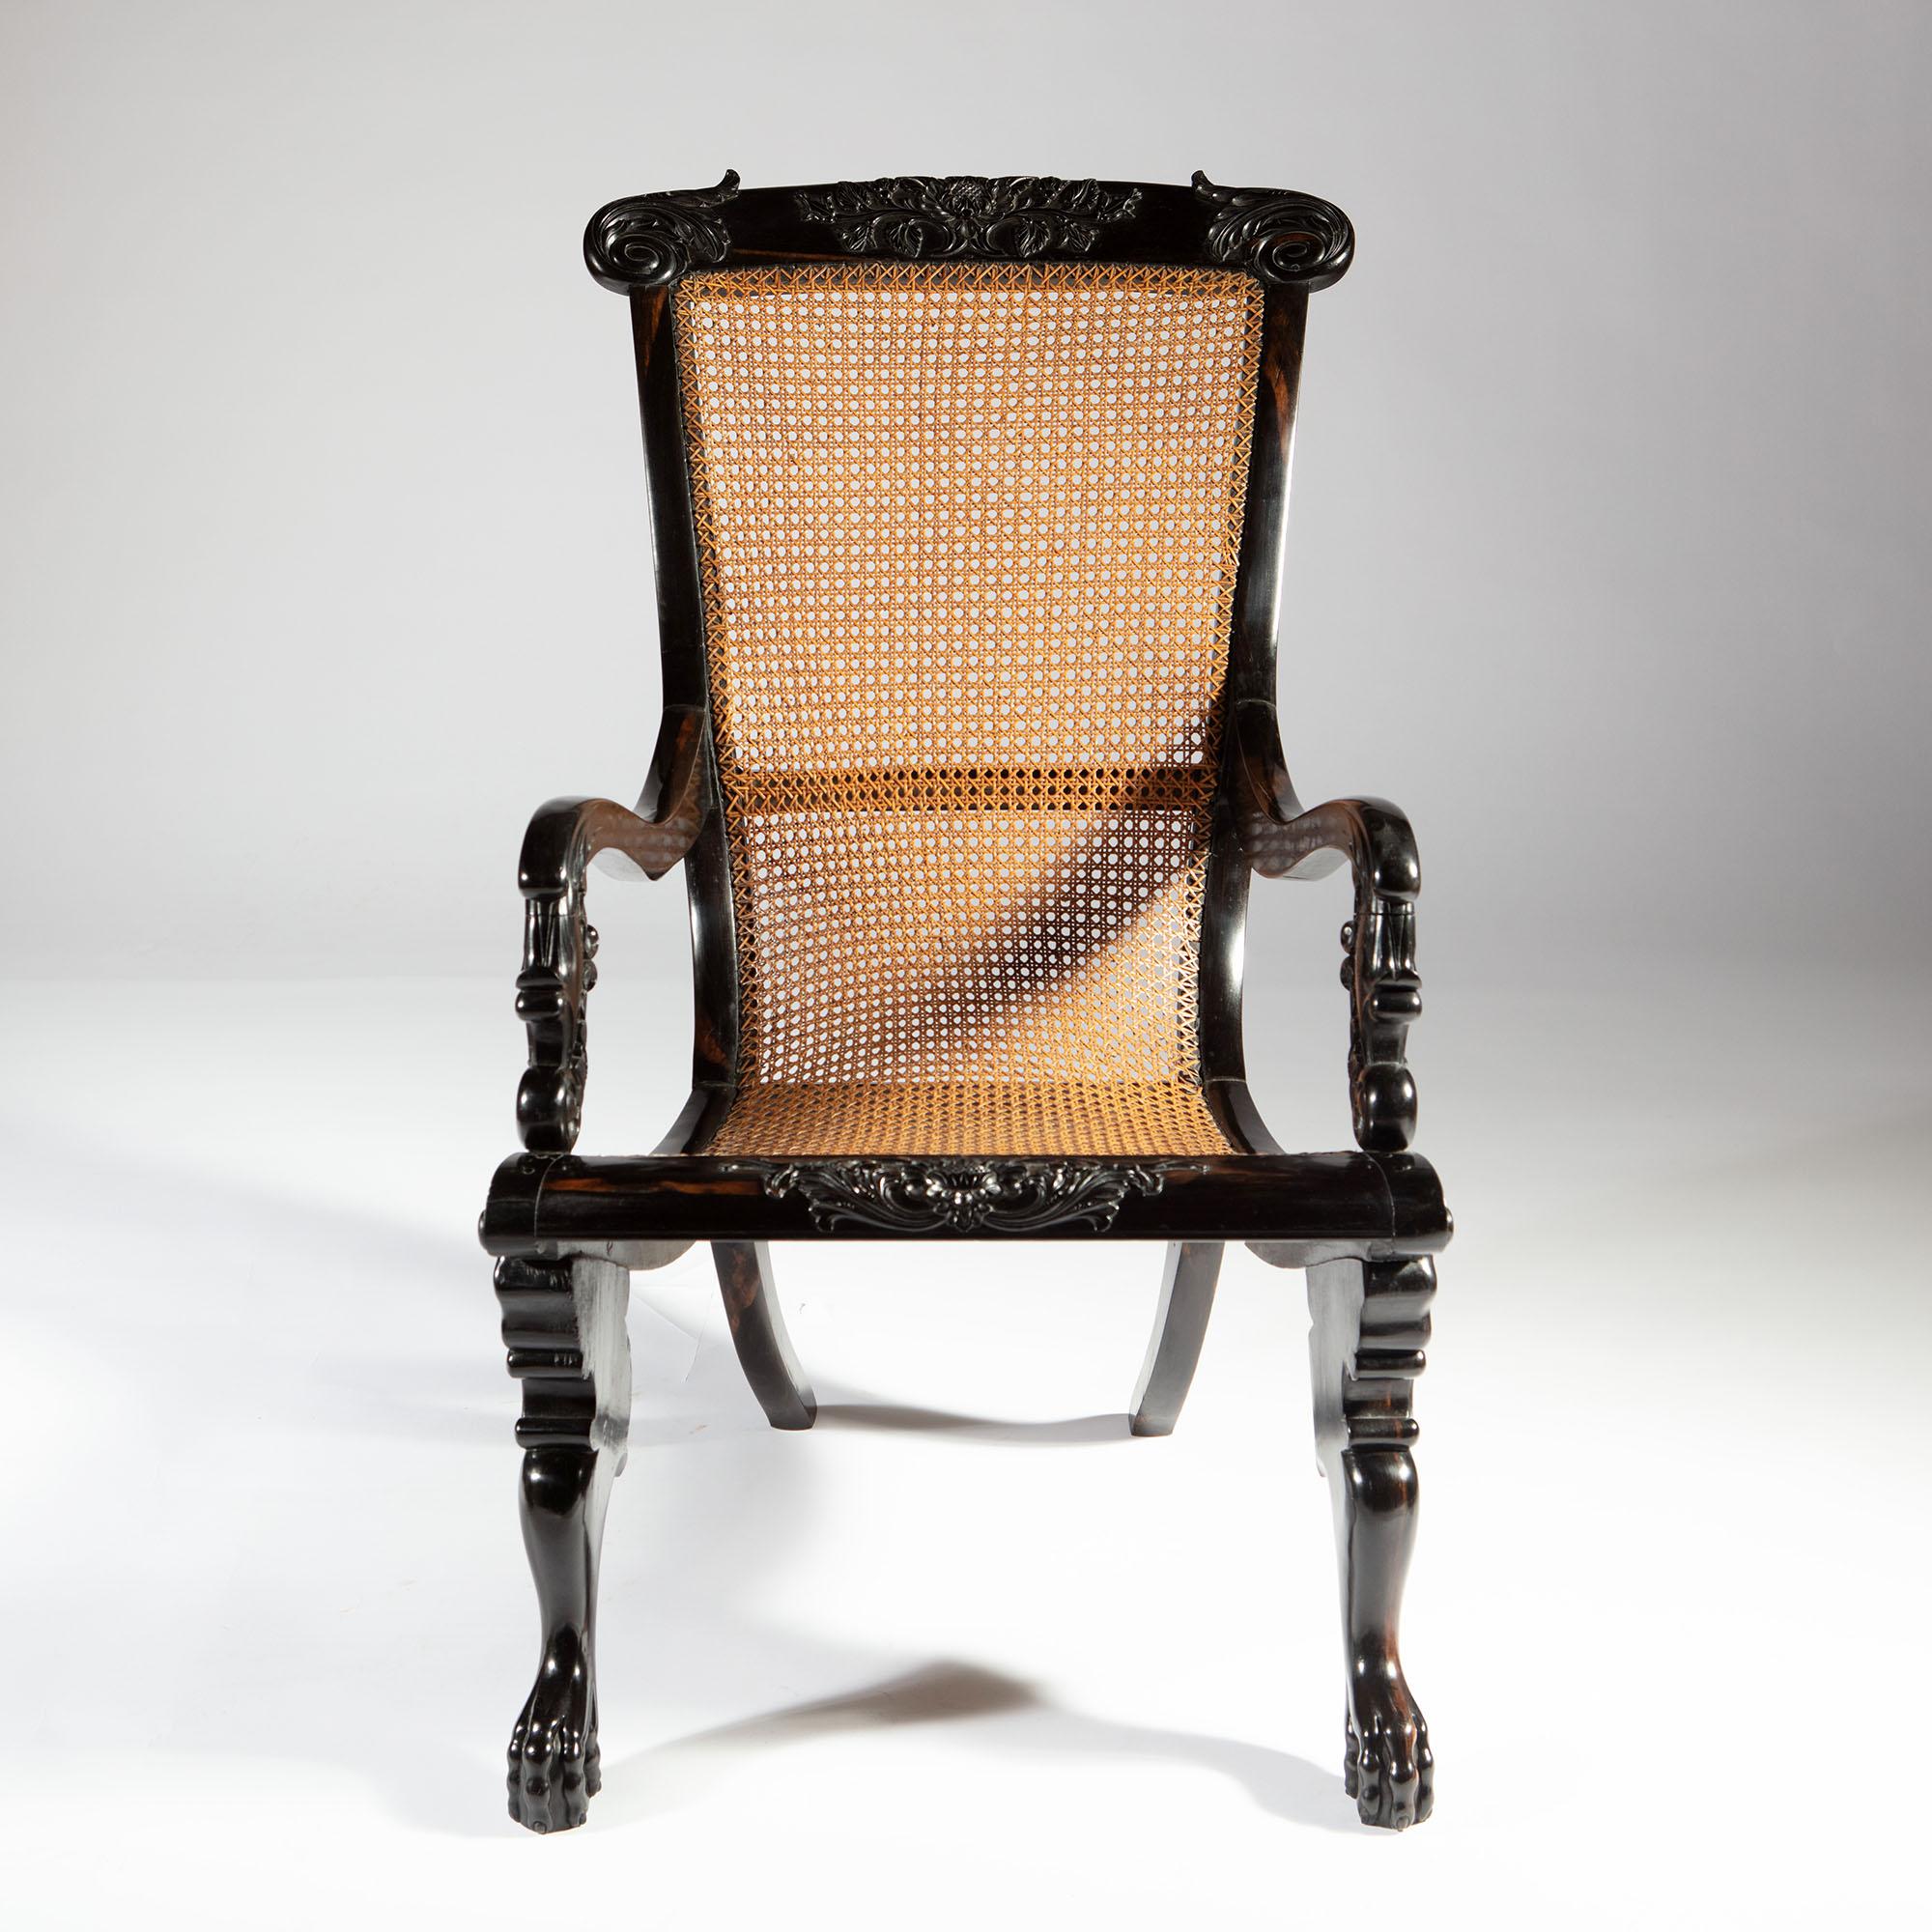 A very fine richly figured solid ebony Anglo-Indian armchair. The curved caned seat with an intricately carved floral top rail, sweeping highly sculptural arms and supported on boldly carved zoomorphic legs.
India, Ceylon, circa 1850

Measures: